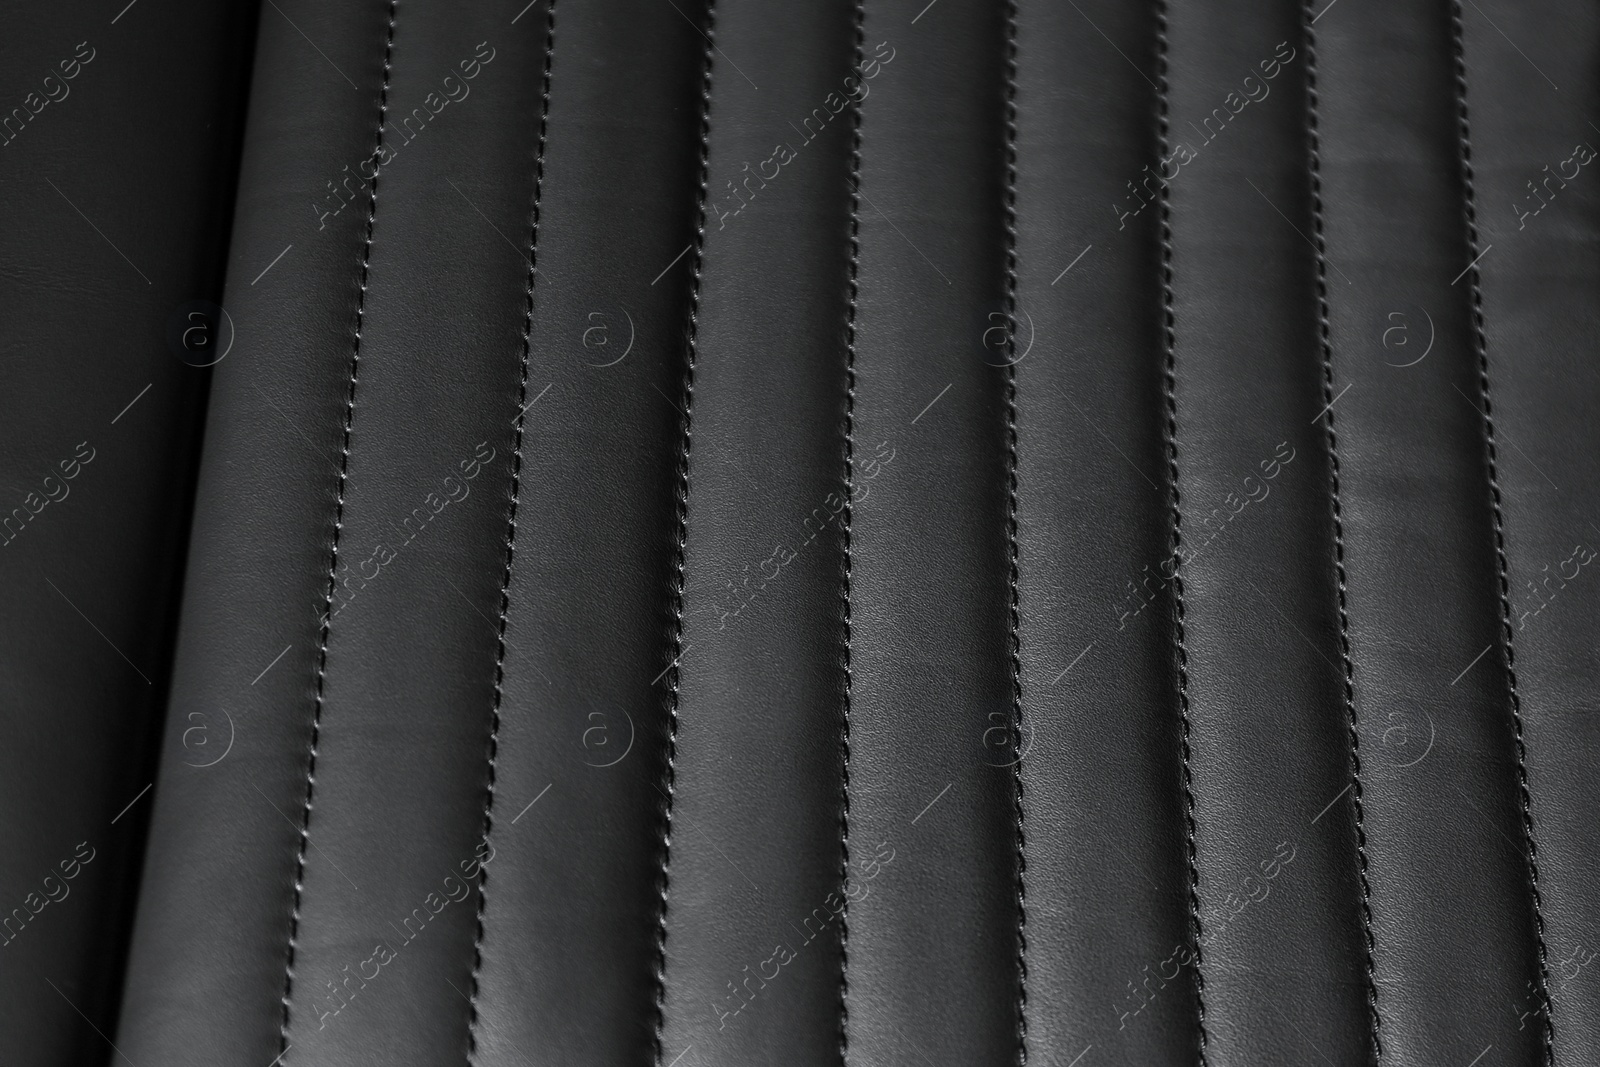 Photo of Car seat with leather upholstery, closeup view